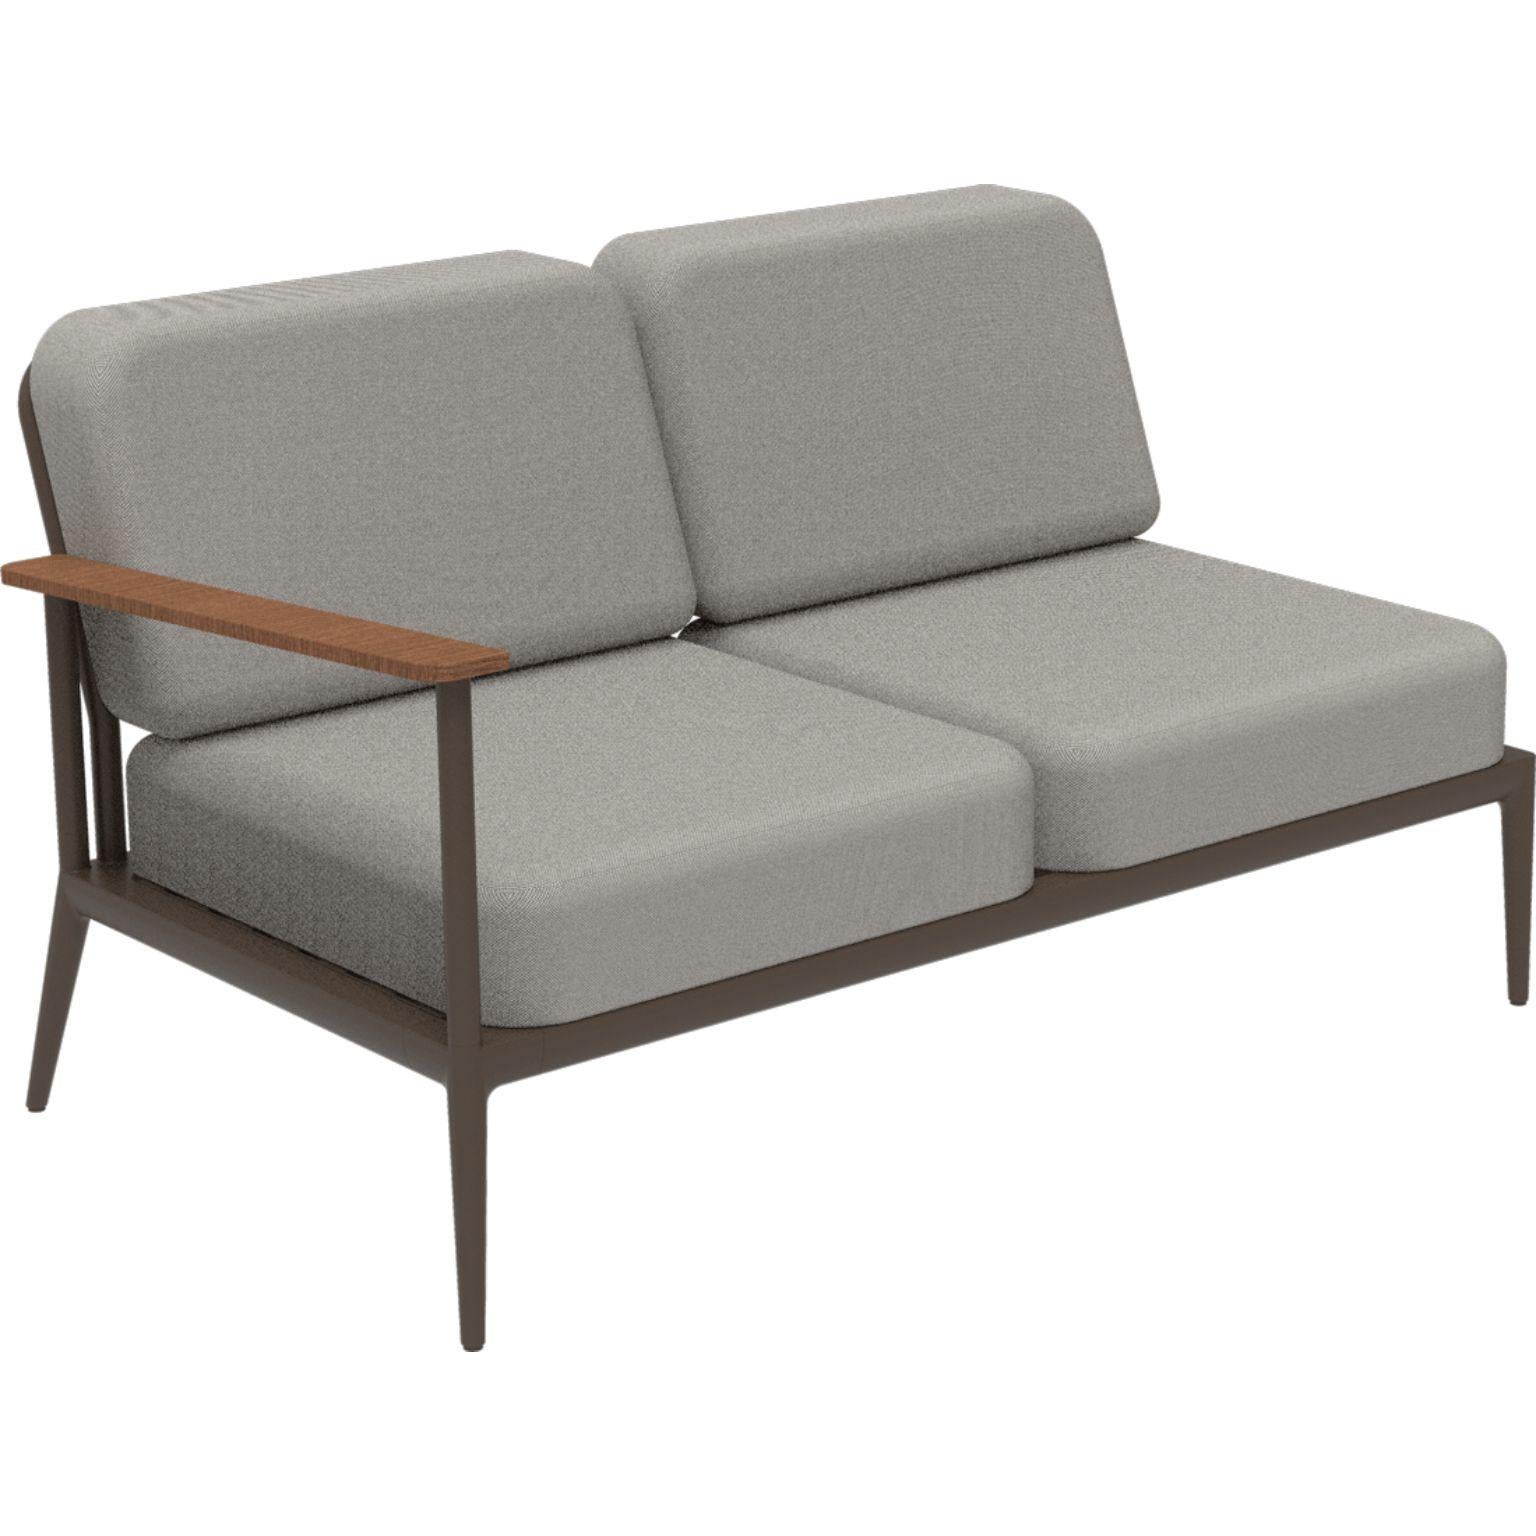 Nature bronze double right modular sofa by MOWEE
Dimensions: D85 x W144 x H81 cm (seat height 42 cm).
Material: Aluminum, upholstery and Iroko Wood.
Weight: 29 kg.
Also available in different colors and finishes.

An unmistakable collection